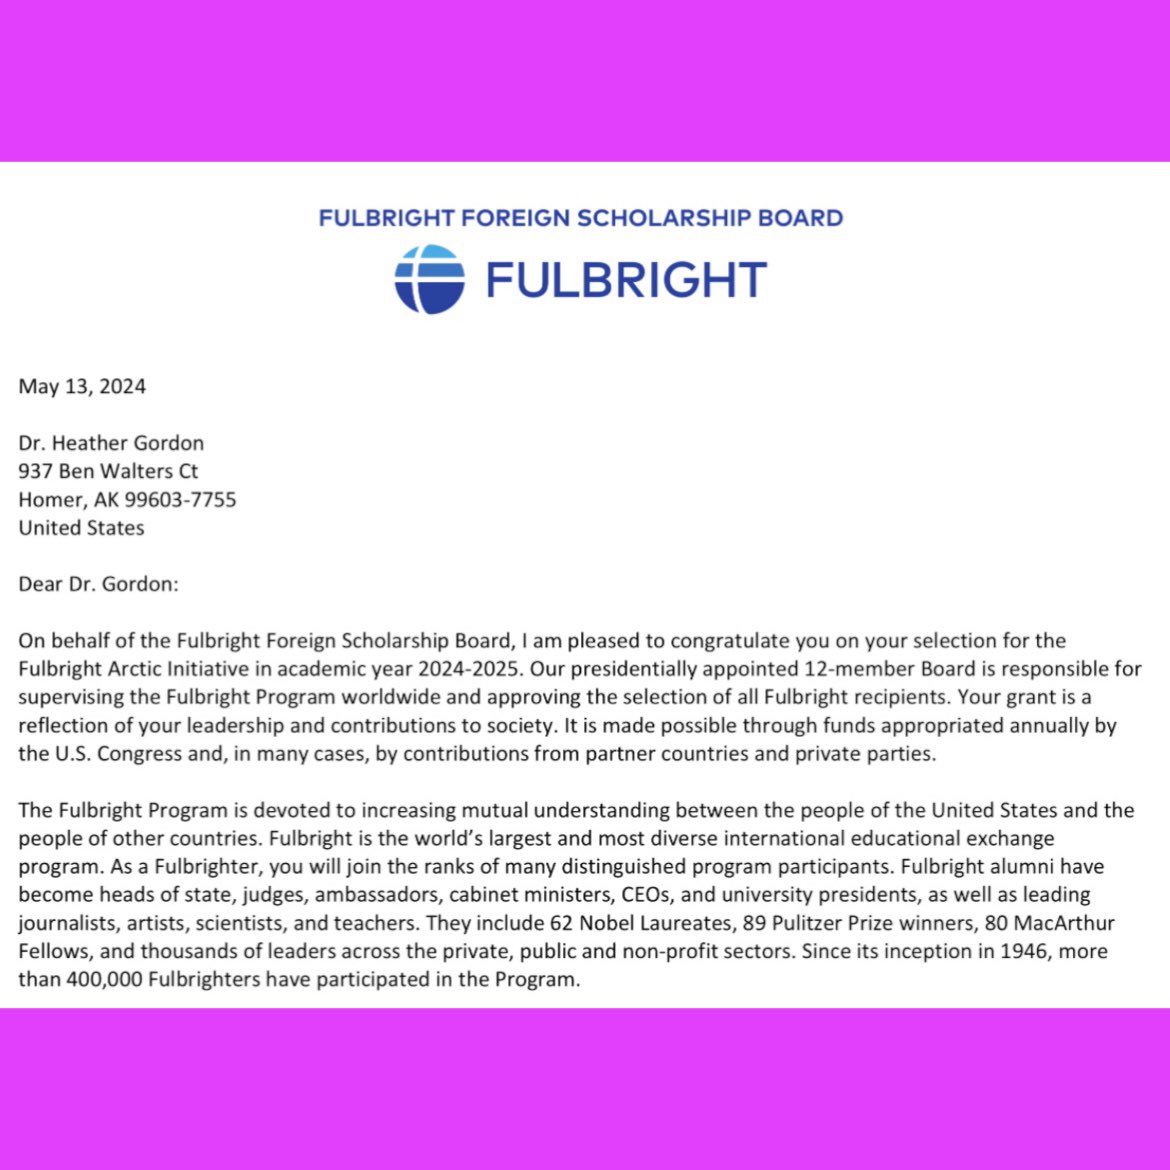 This is my thrilled face! I was awarded the Arctic Fulbright!!!!!